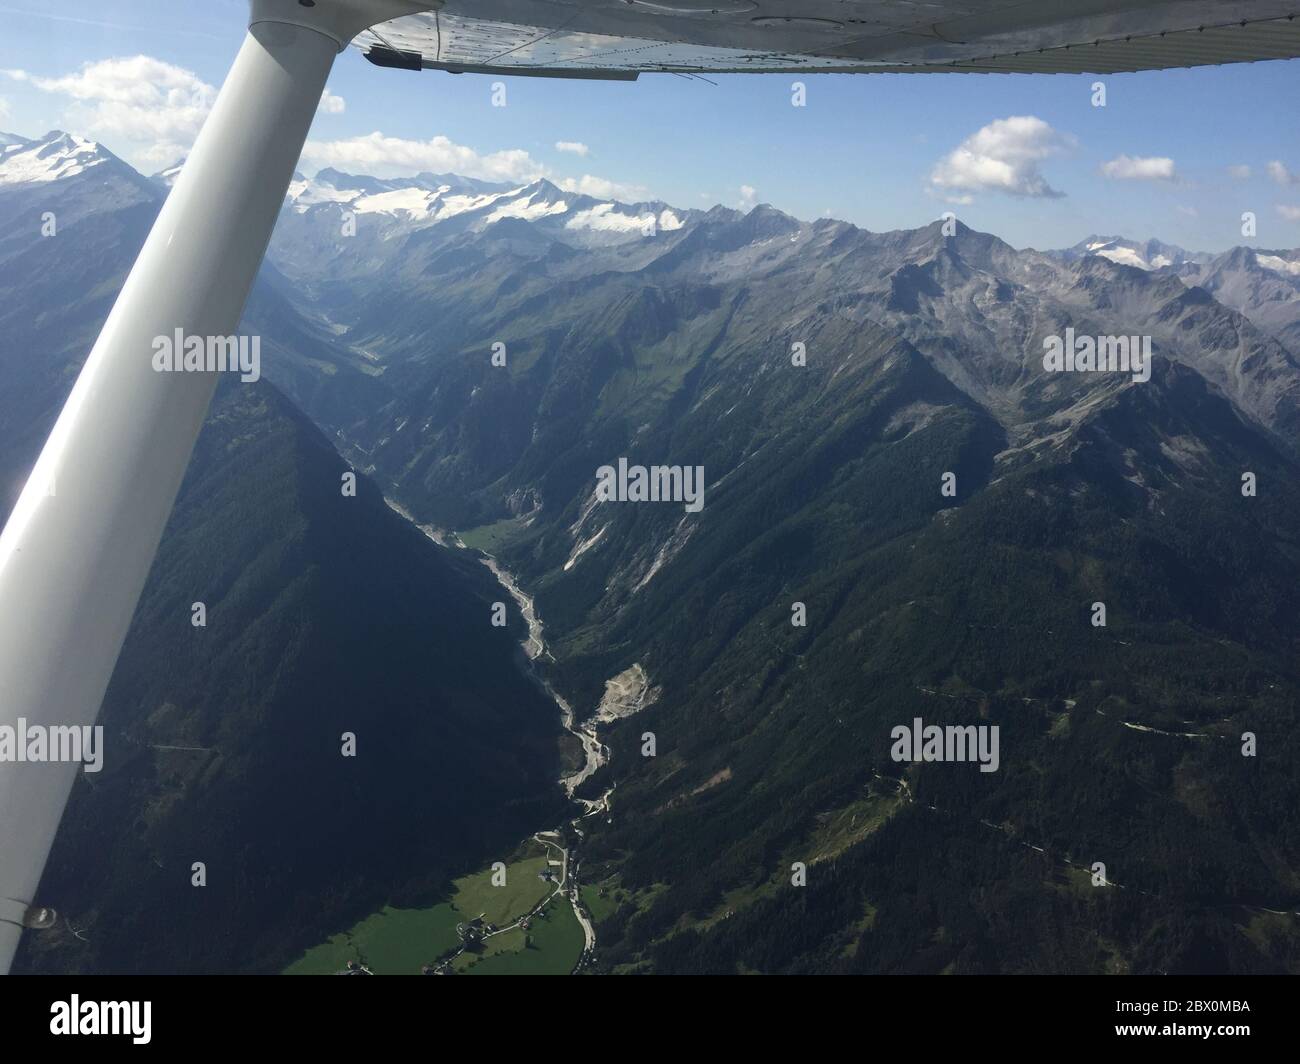 Austrians wonderful mountain scenery seen from a small plane 2017 Stock Photo